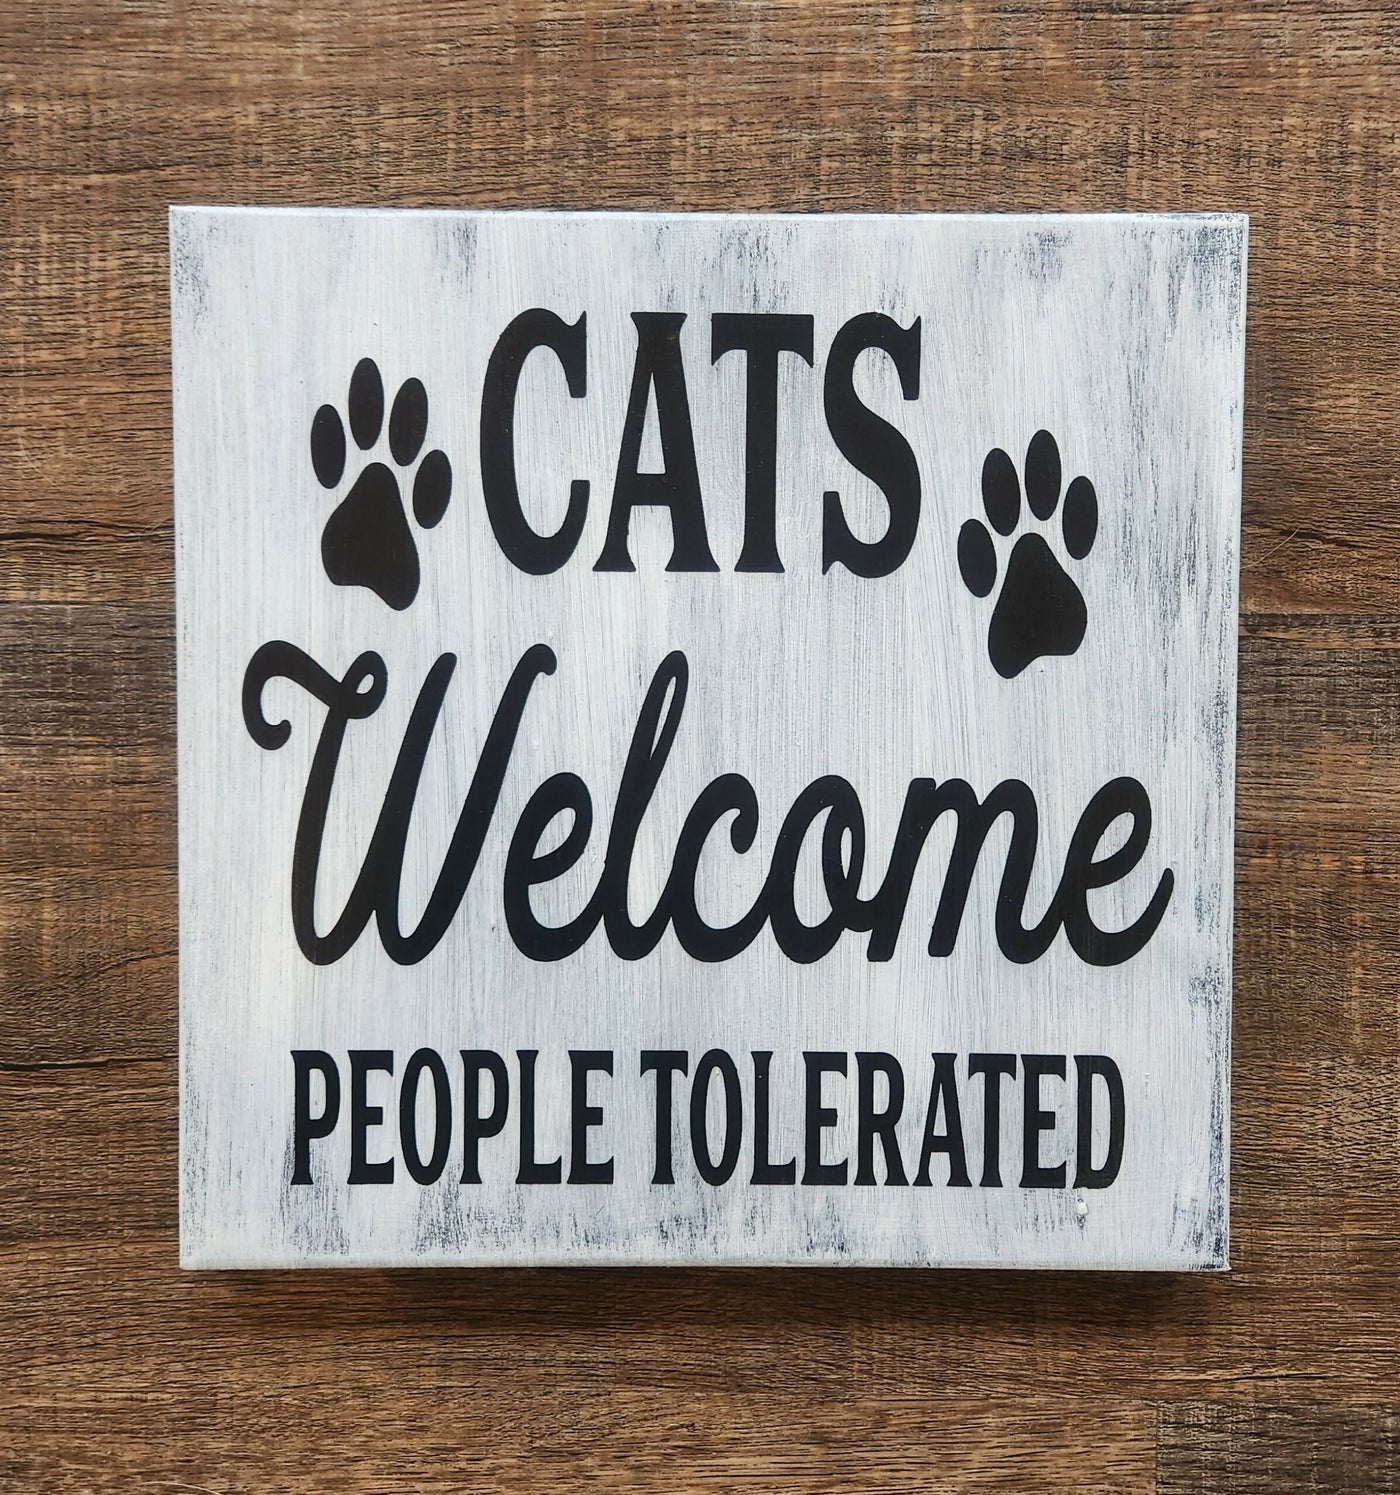 Cats welcome, people tolerated sign